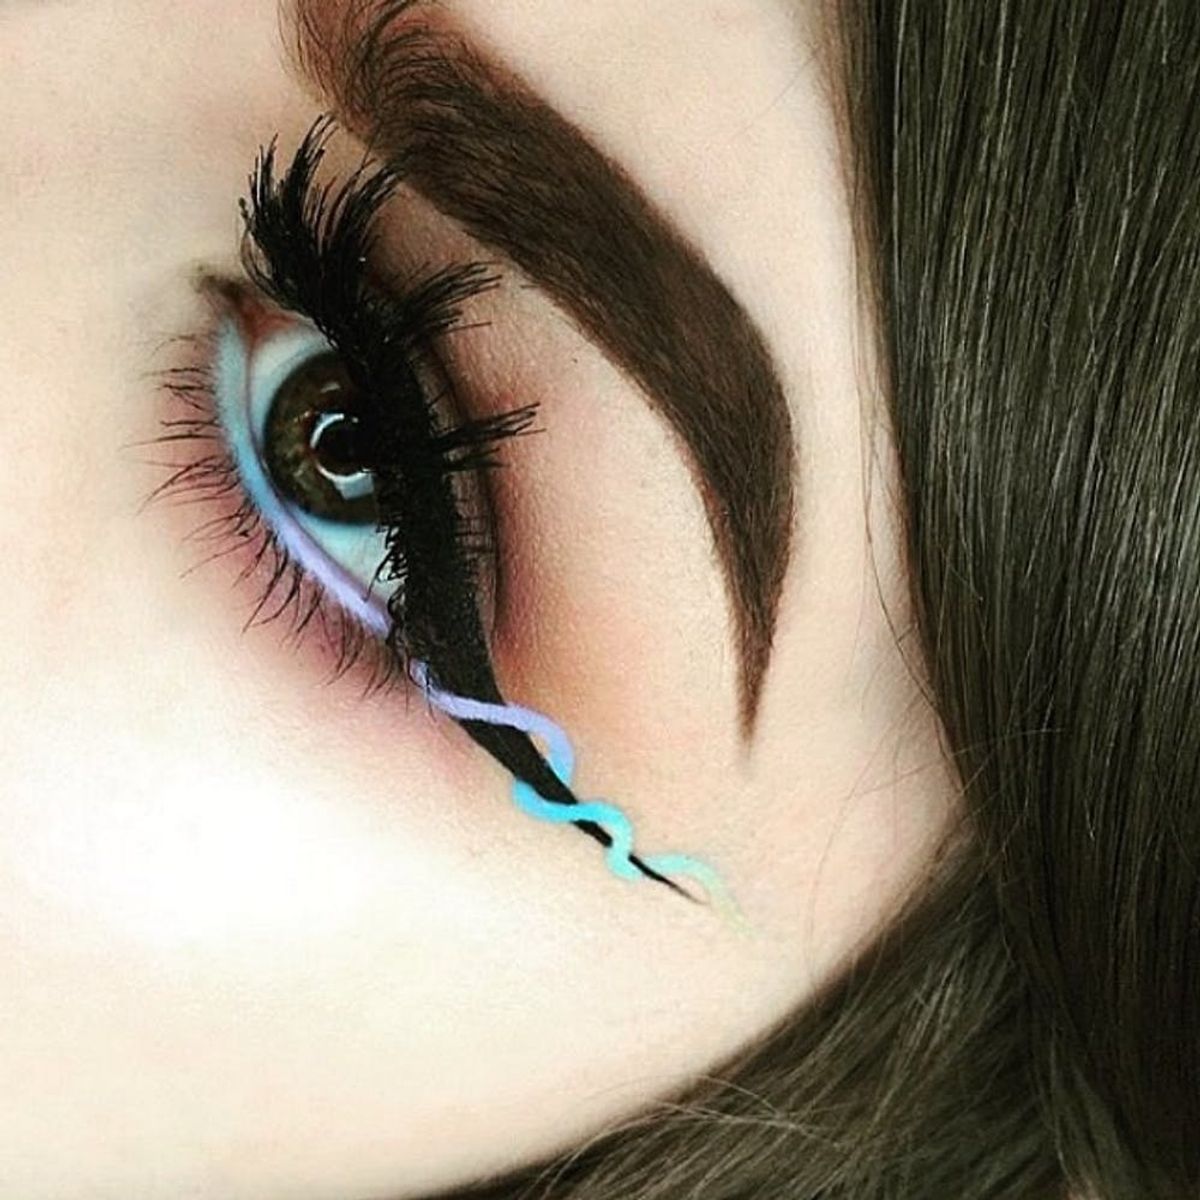 Helix Eyeliner Is the Makeup Trend You Need to See to Believe